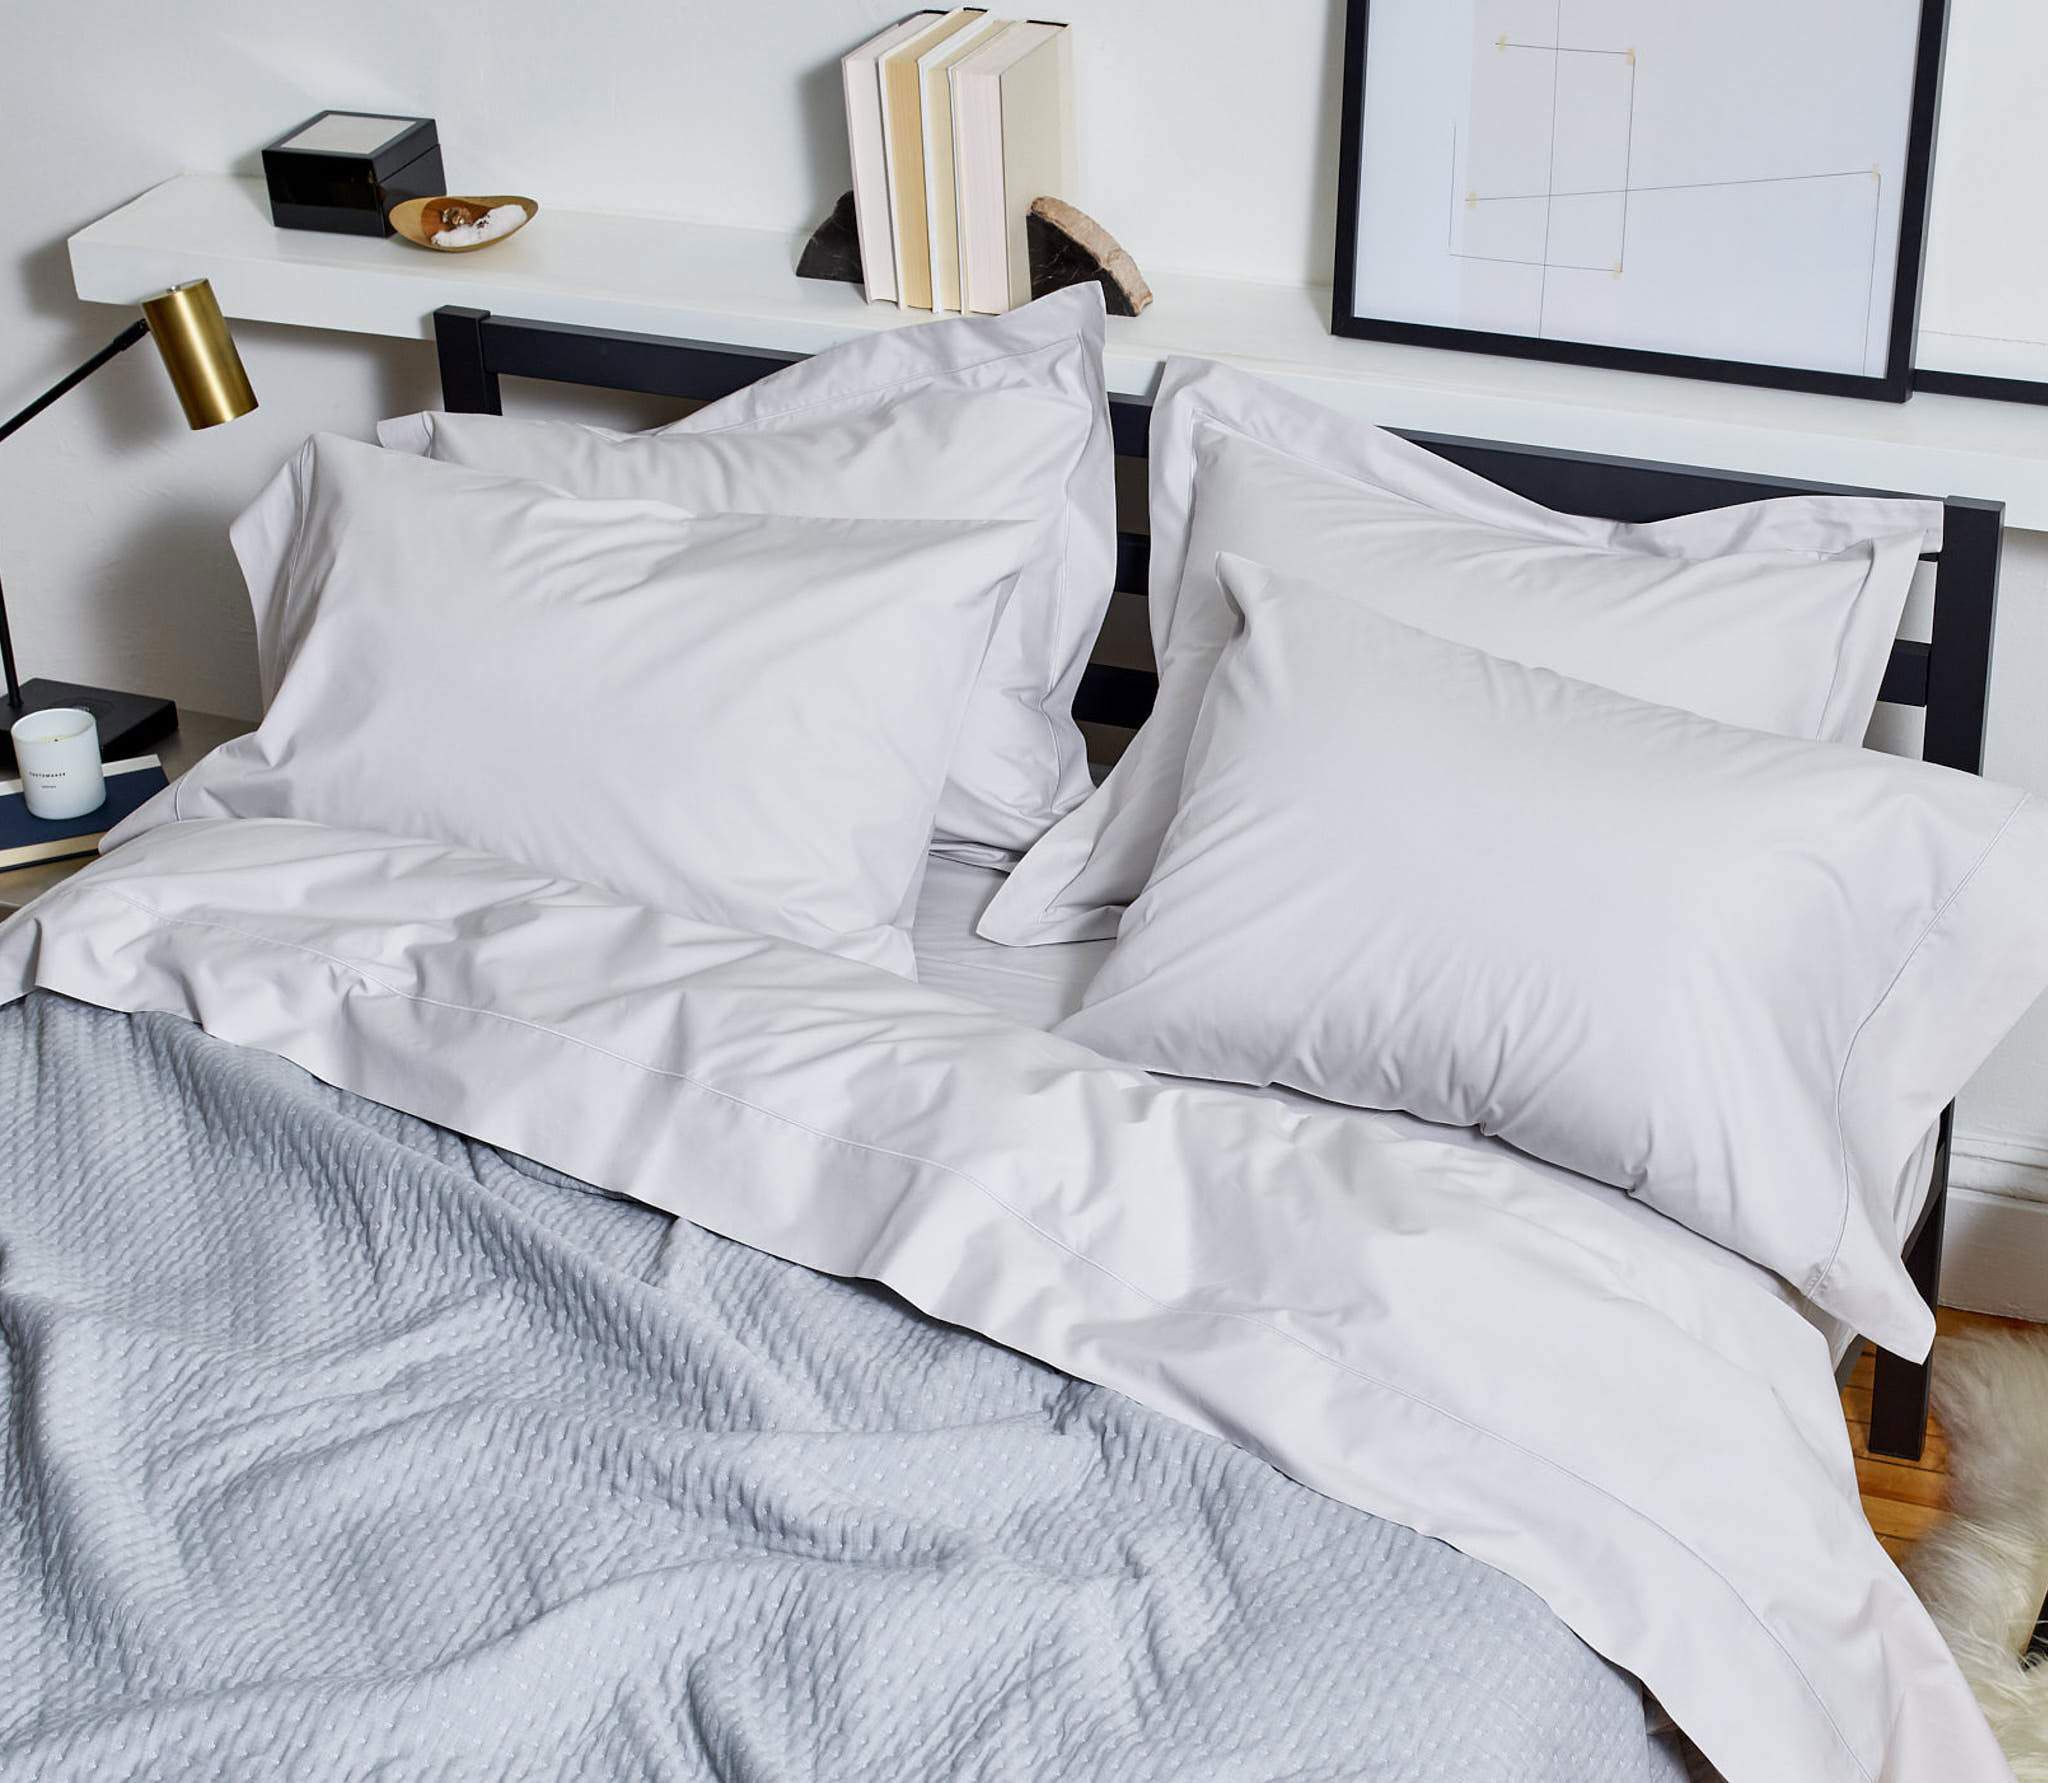 {bestsheets} - bed| feel| sets| material| colors| thread| bedding| mattress| linen| bamboo| sizes| king| pillowcases| weave| quality| options| night| twin| inches| sleepers| percale| color| people| mattresses| price| home| notes| silk| brooklinen| option| reviews| skin| fibers| product| thread count| fitted sheet| linen sheets| flat sheet| sateen sheets| egyptian cotton| bed sheets| sateen weave| ooler| lab notes| organic cotton| percale sheets| sleep trial| sheet set| hot sleepers| cotton sheets| percale sheet| sheet sets| bamboo sheets| sateen sheet| free shipping| sensitive skin| pocket depth| long-staple cotton| color options| bamboo sheet| flannel sheets| linen sheet| california king| sleepfoundation.org link| current discount